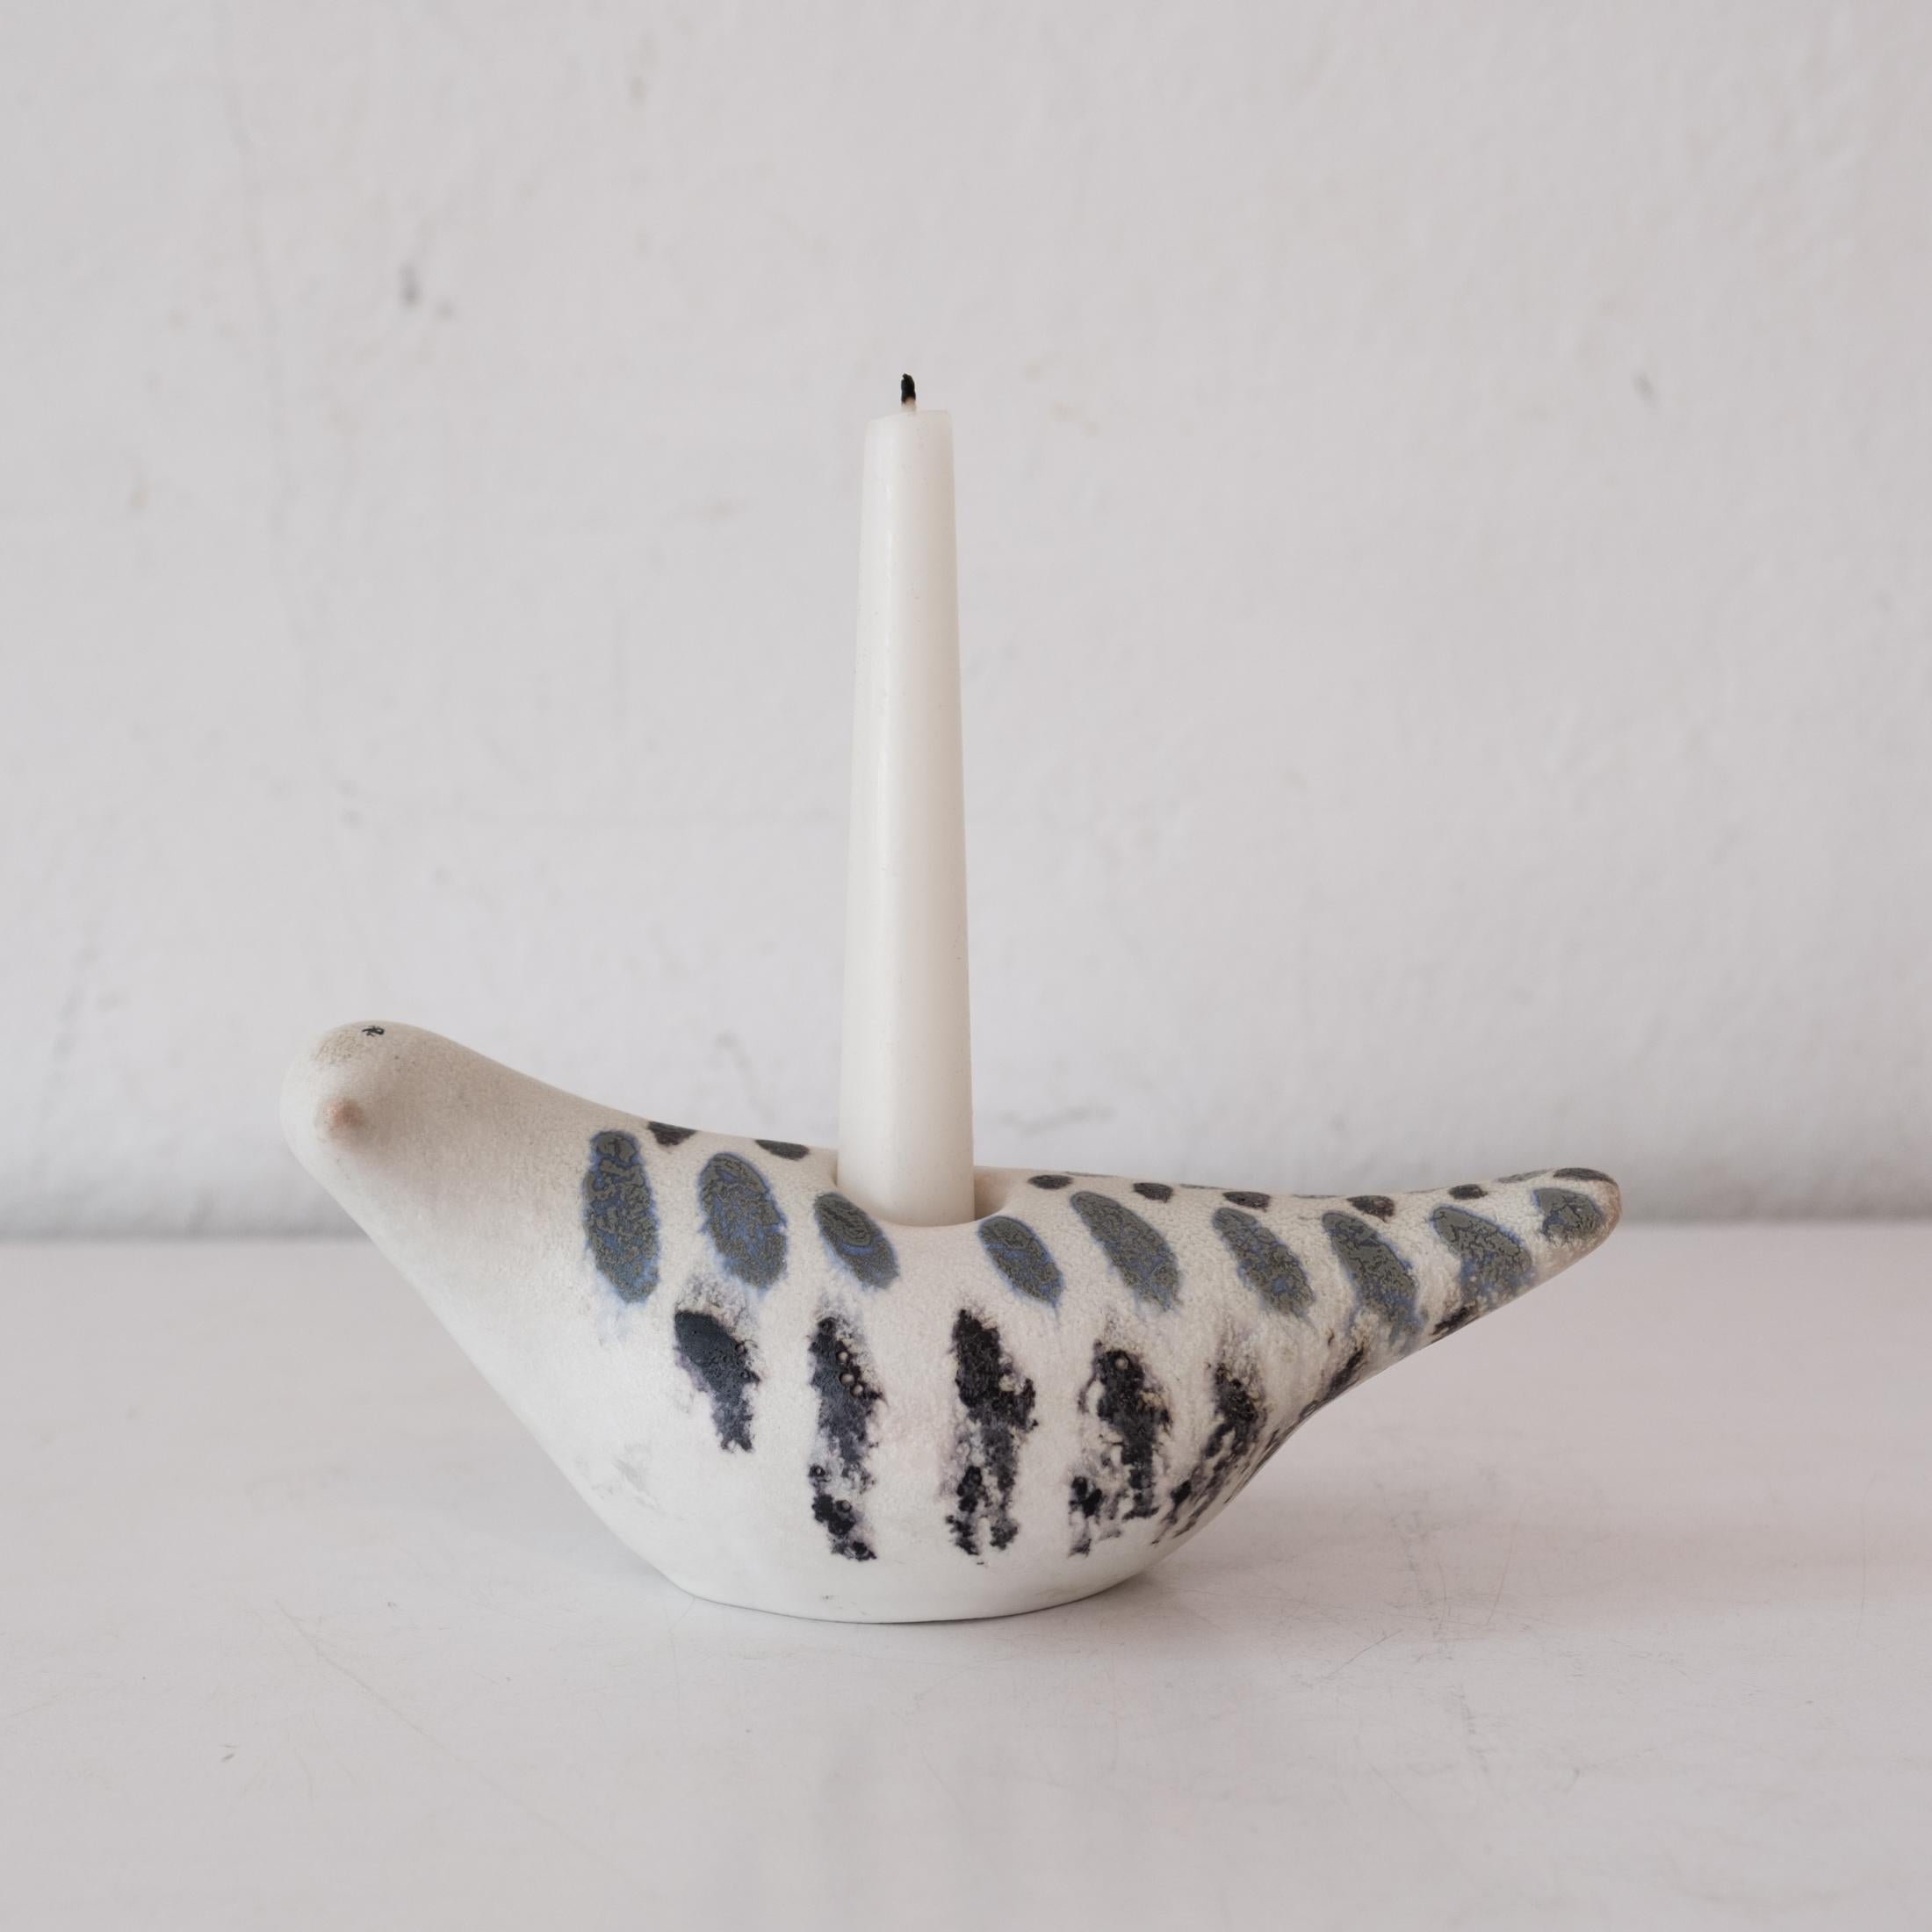 A rare Marcello Fantoni bird candle holder from the 1950s. Glazed spotted design. Signed. Made in Italy.